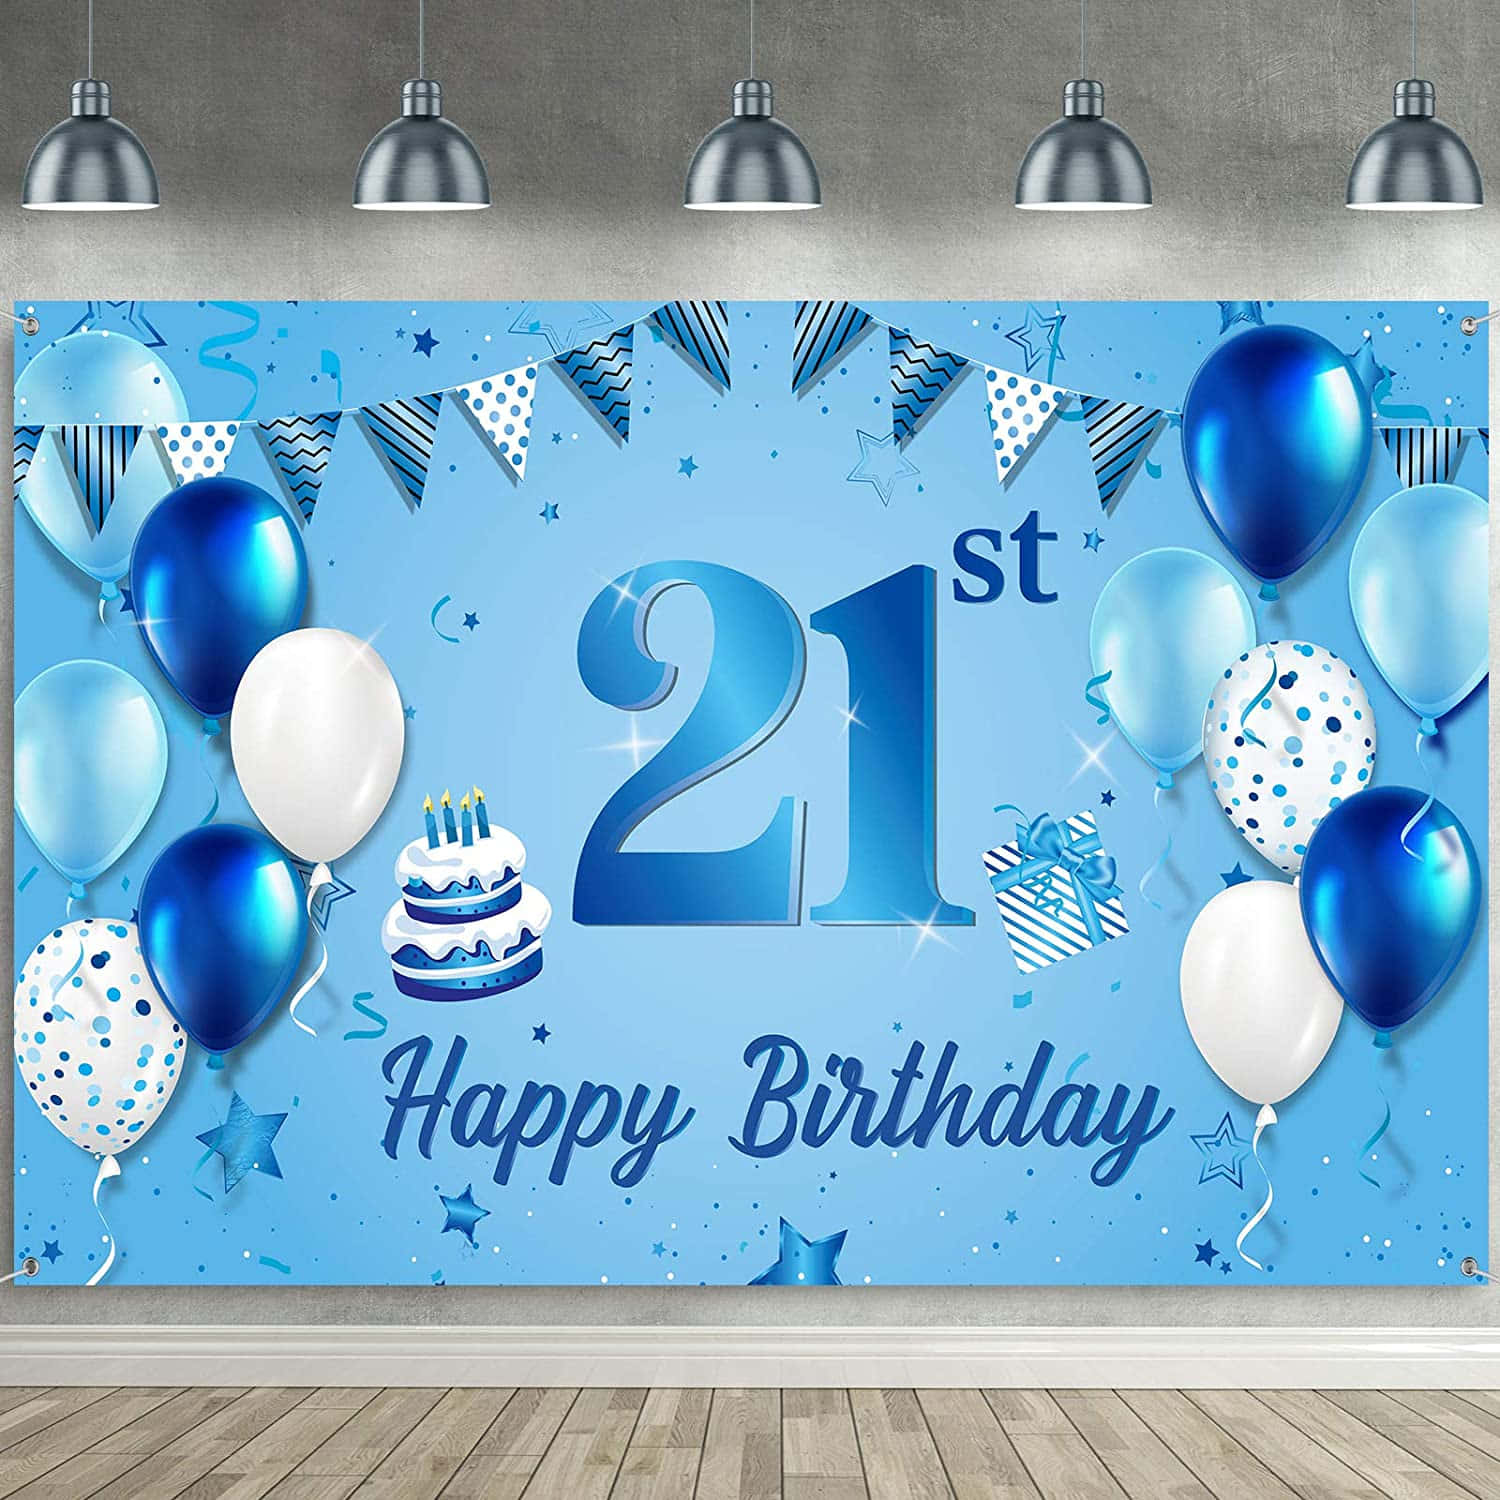 Celebrate your special day with a vibrant blue birthday background